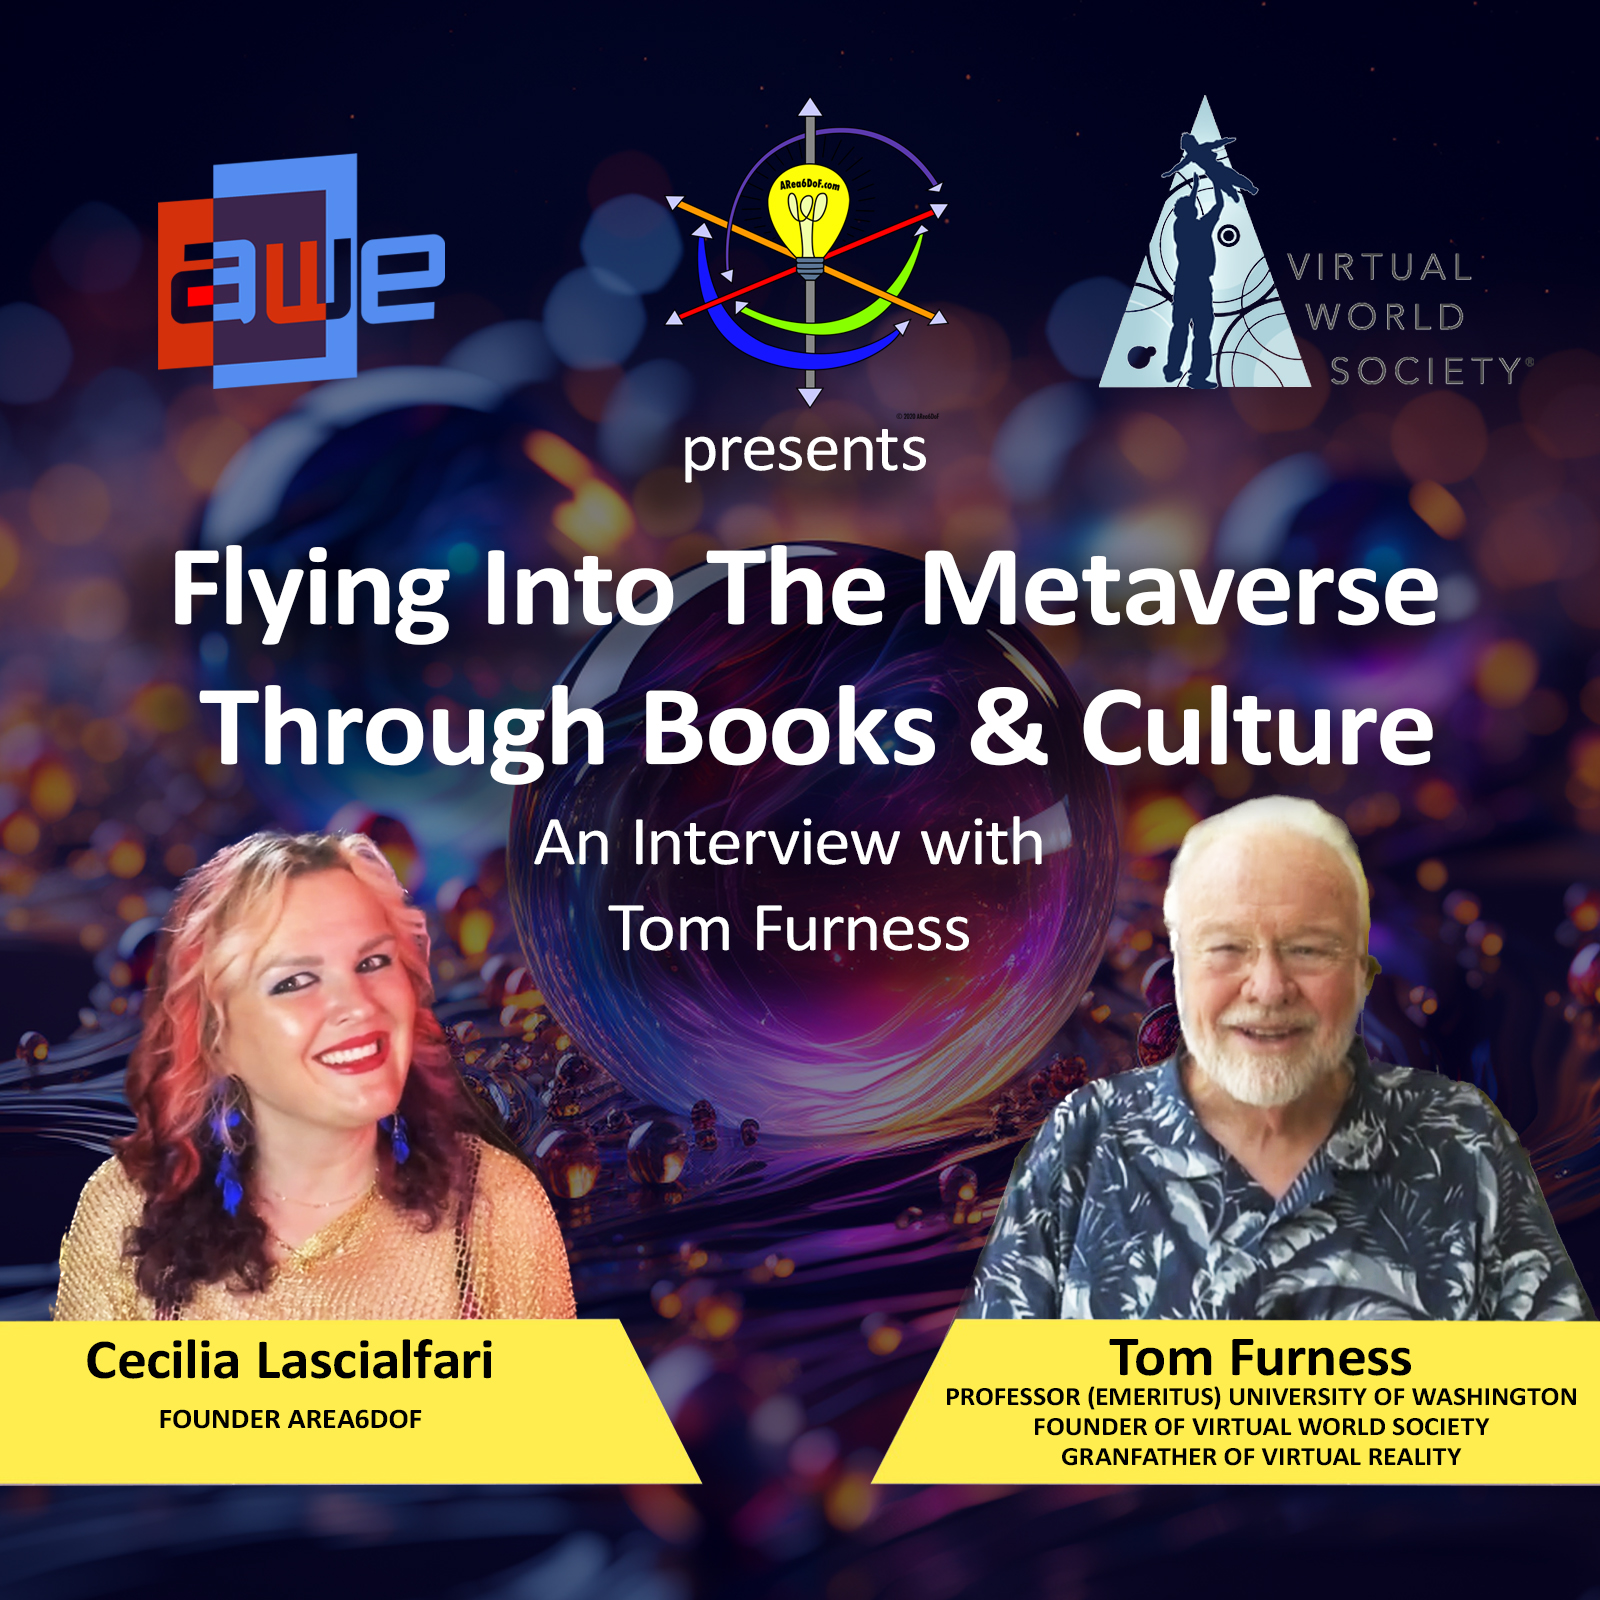 TOM FURNESS at “Flying Into the Metaverse Through Books & Culture” – VIRTUAL WORLD SOCIETY